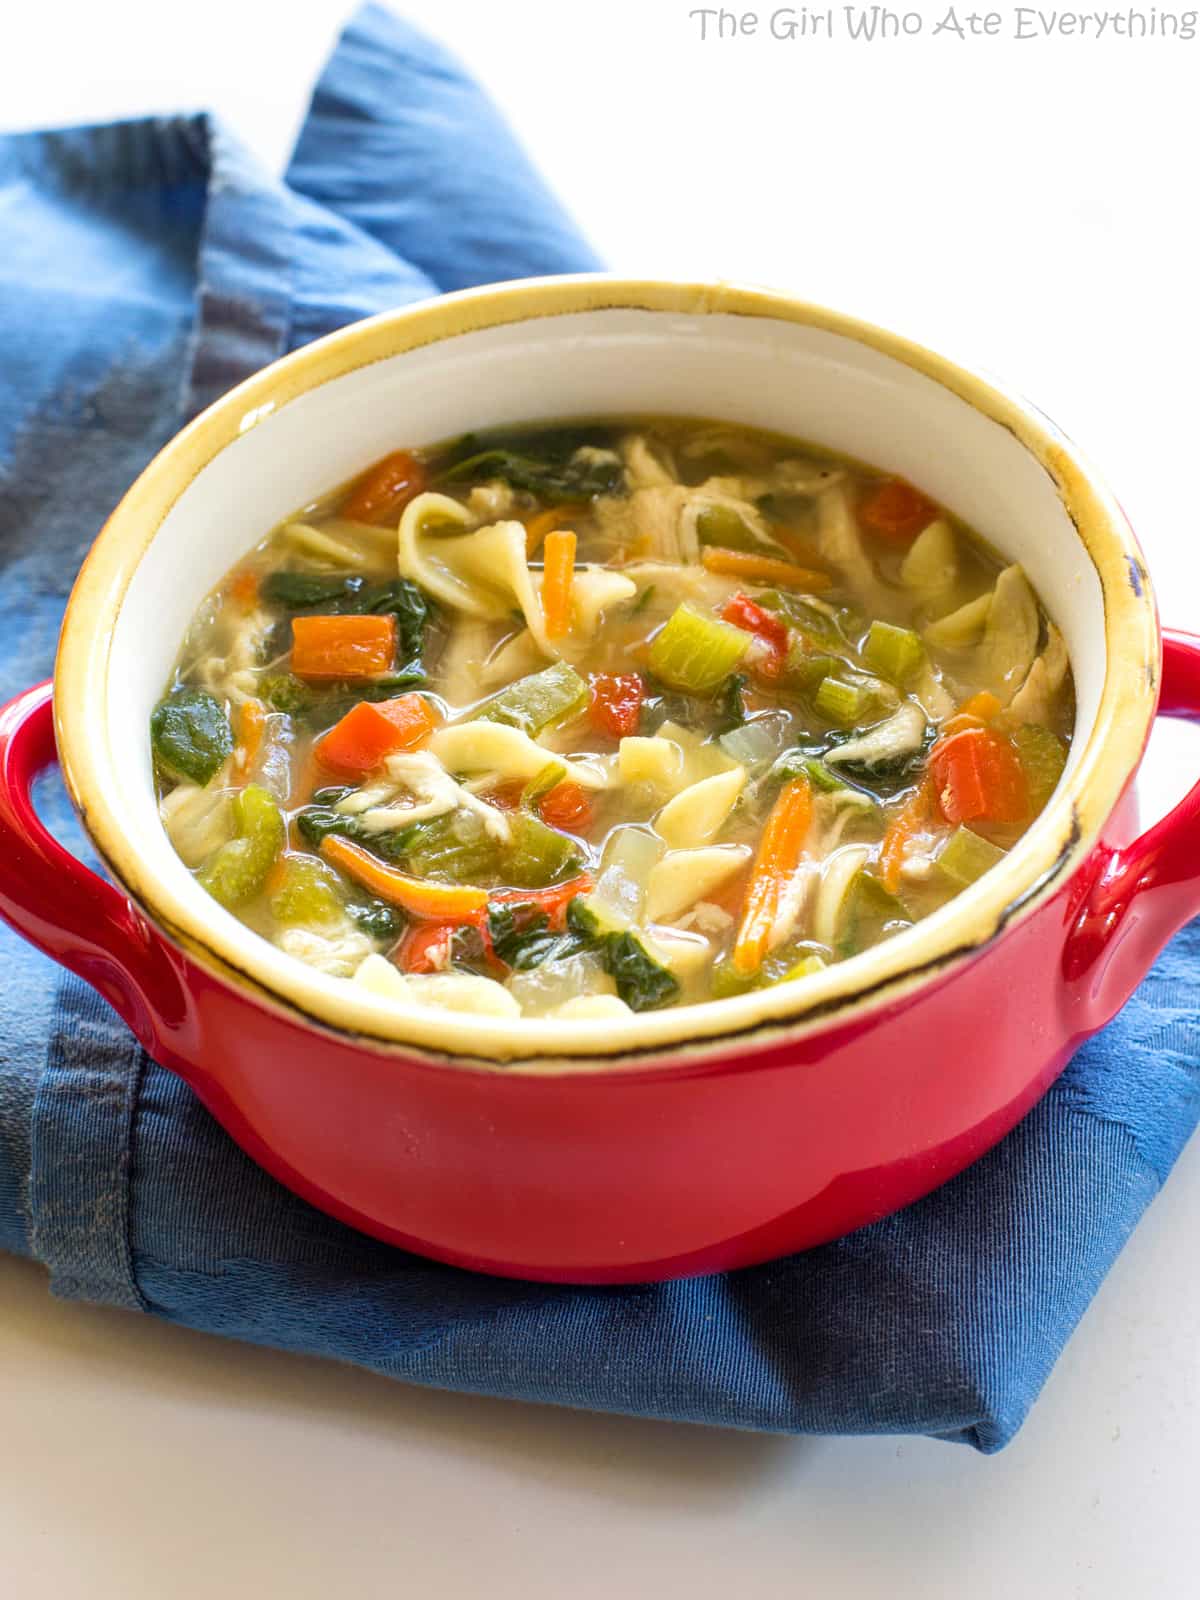 Healthy Vegetable Chicken Soup - this soup is FULL of veggies and great to detox when you need to eat healthy! the-girl-who-ate-everything.com